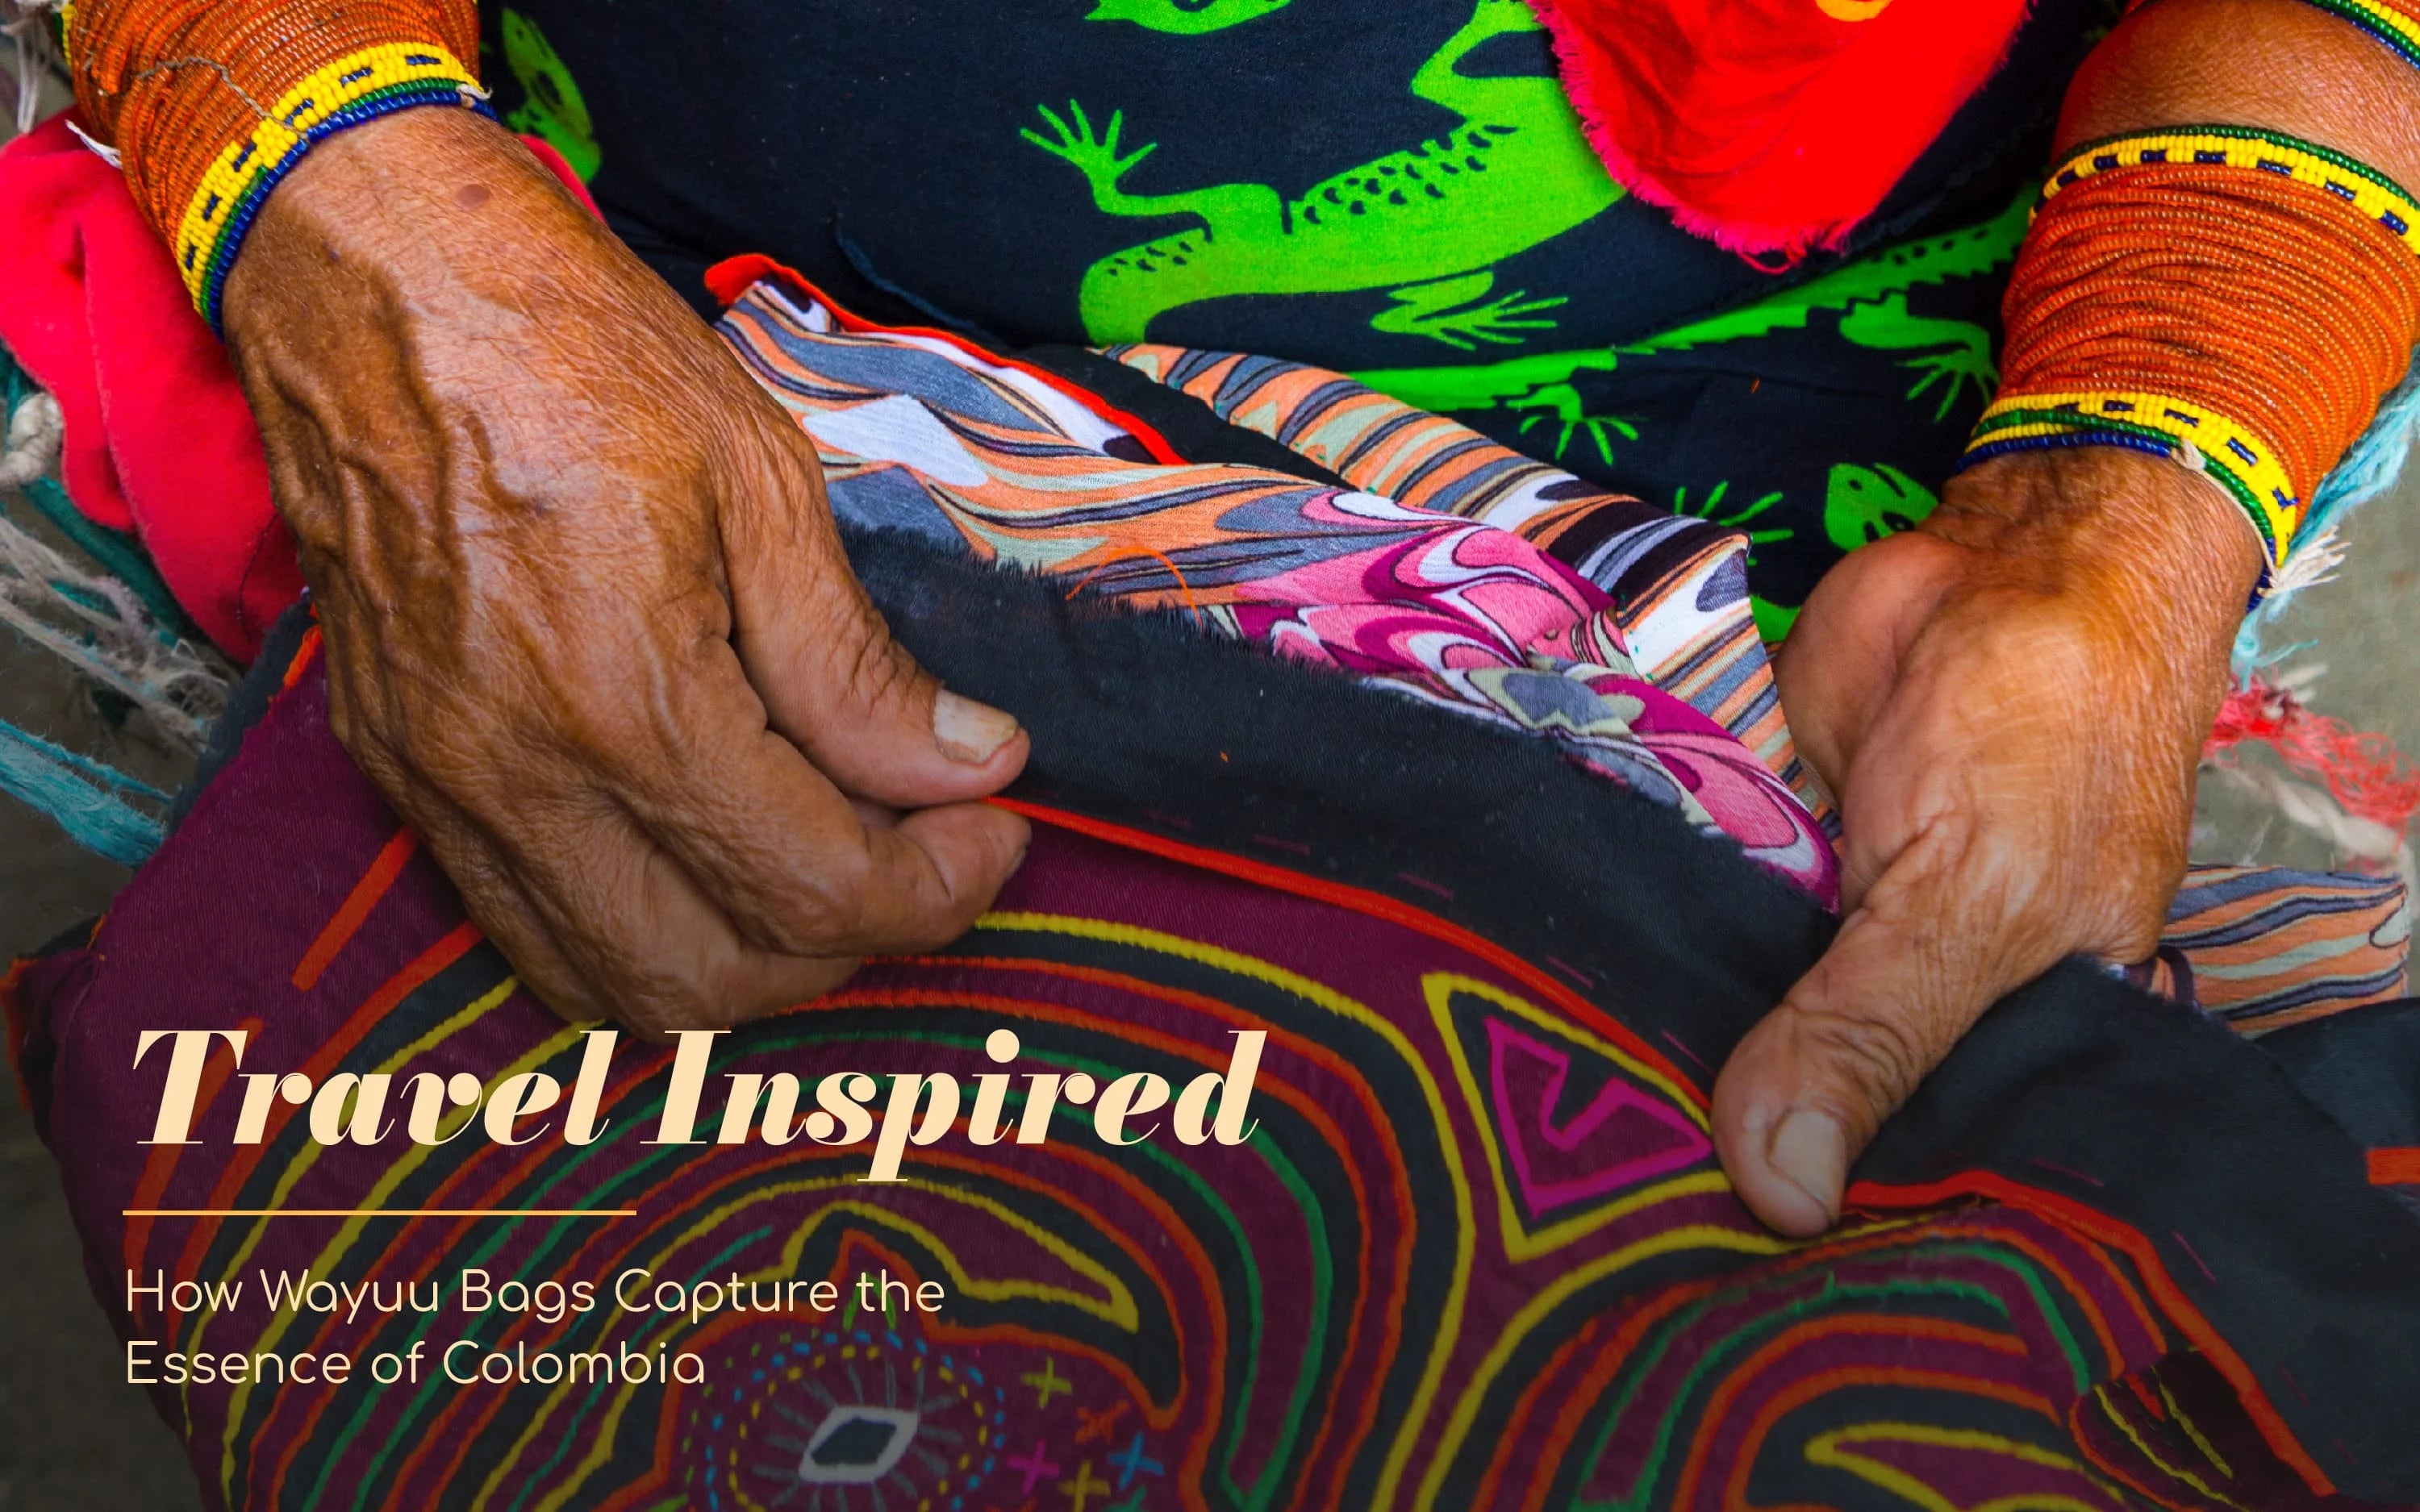 Travel Inspired: How Wayuu Bags Capture the Essence of Colombia